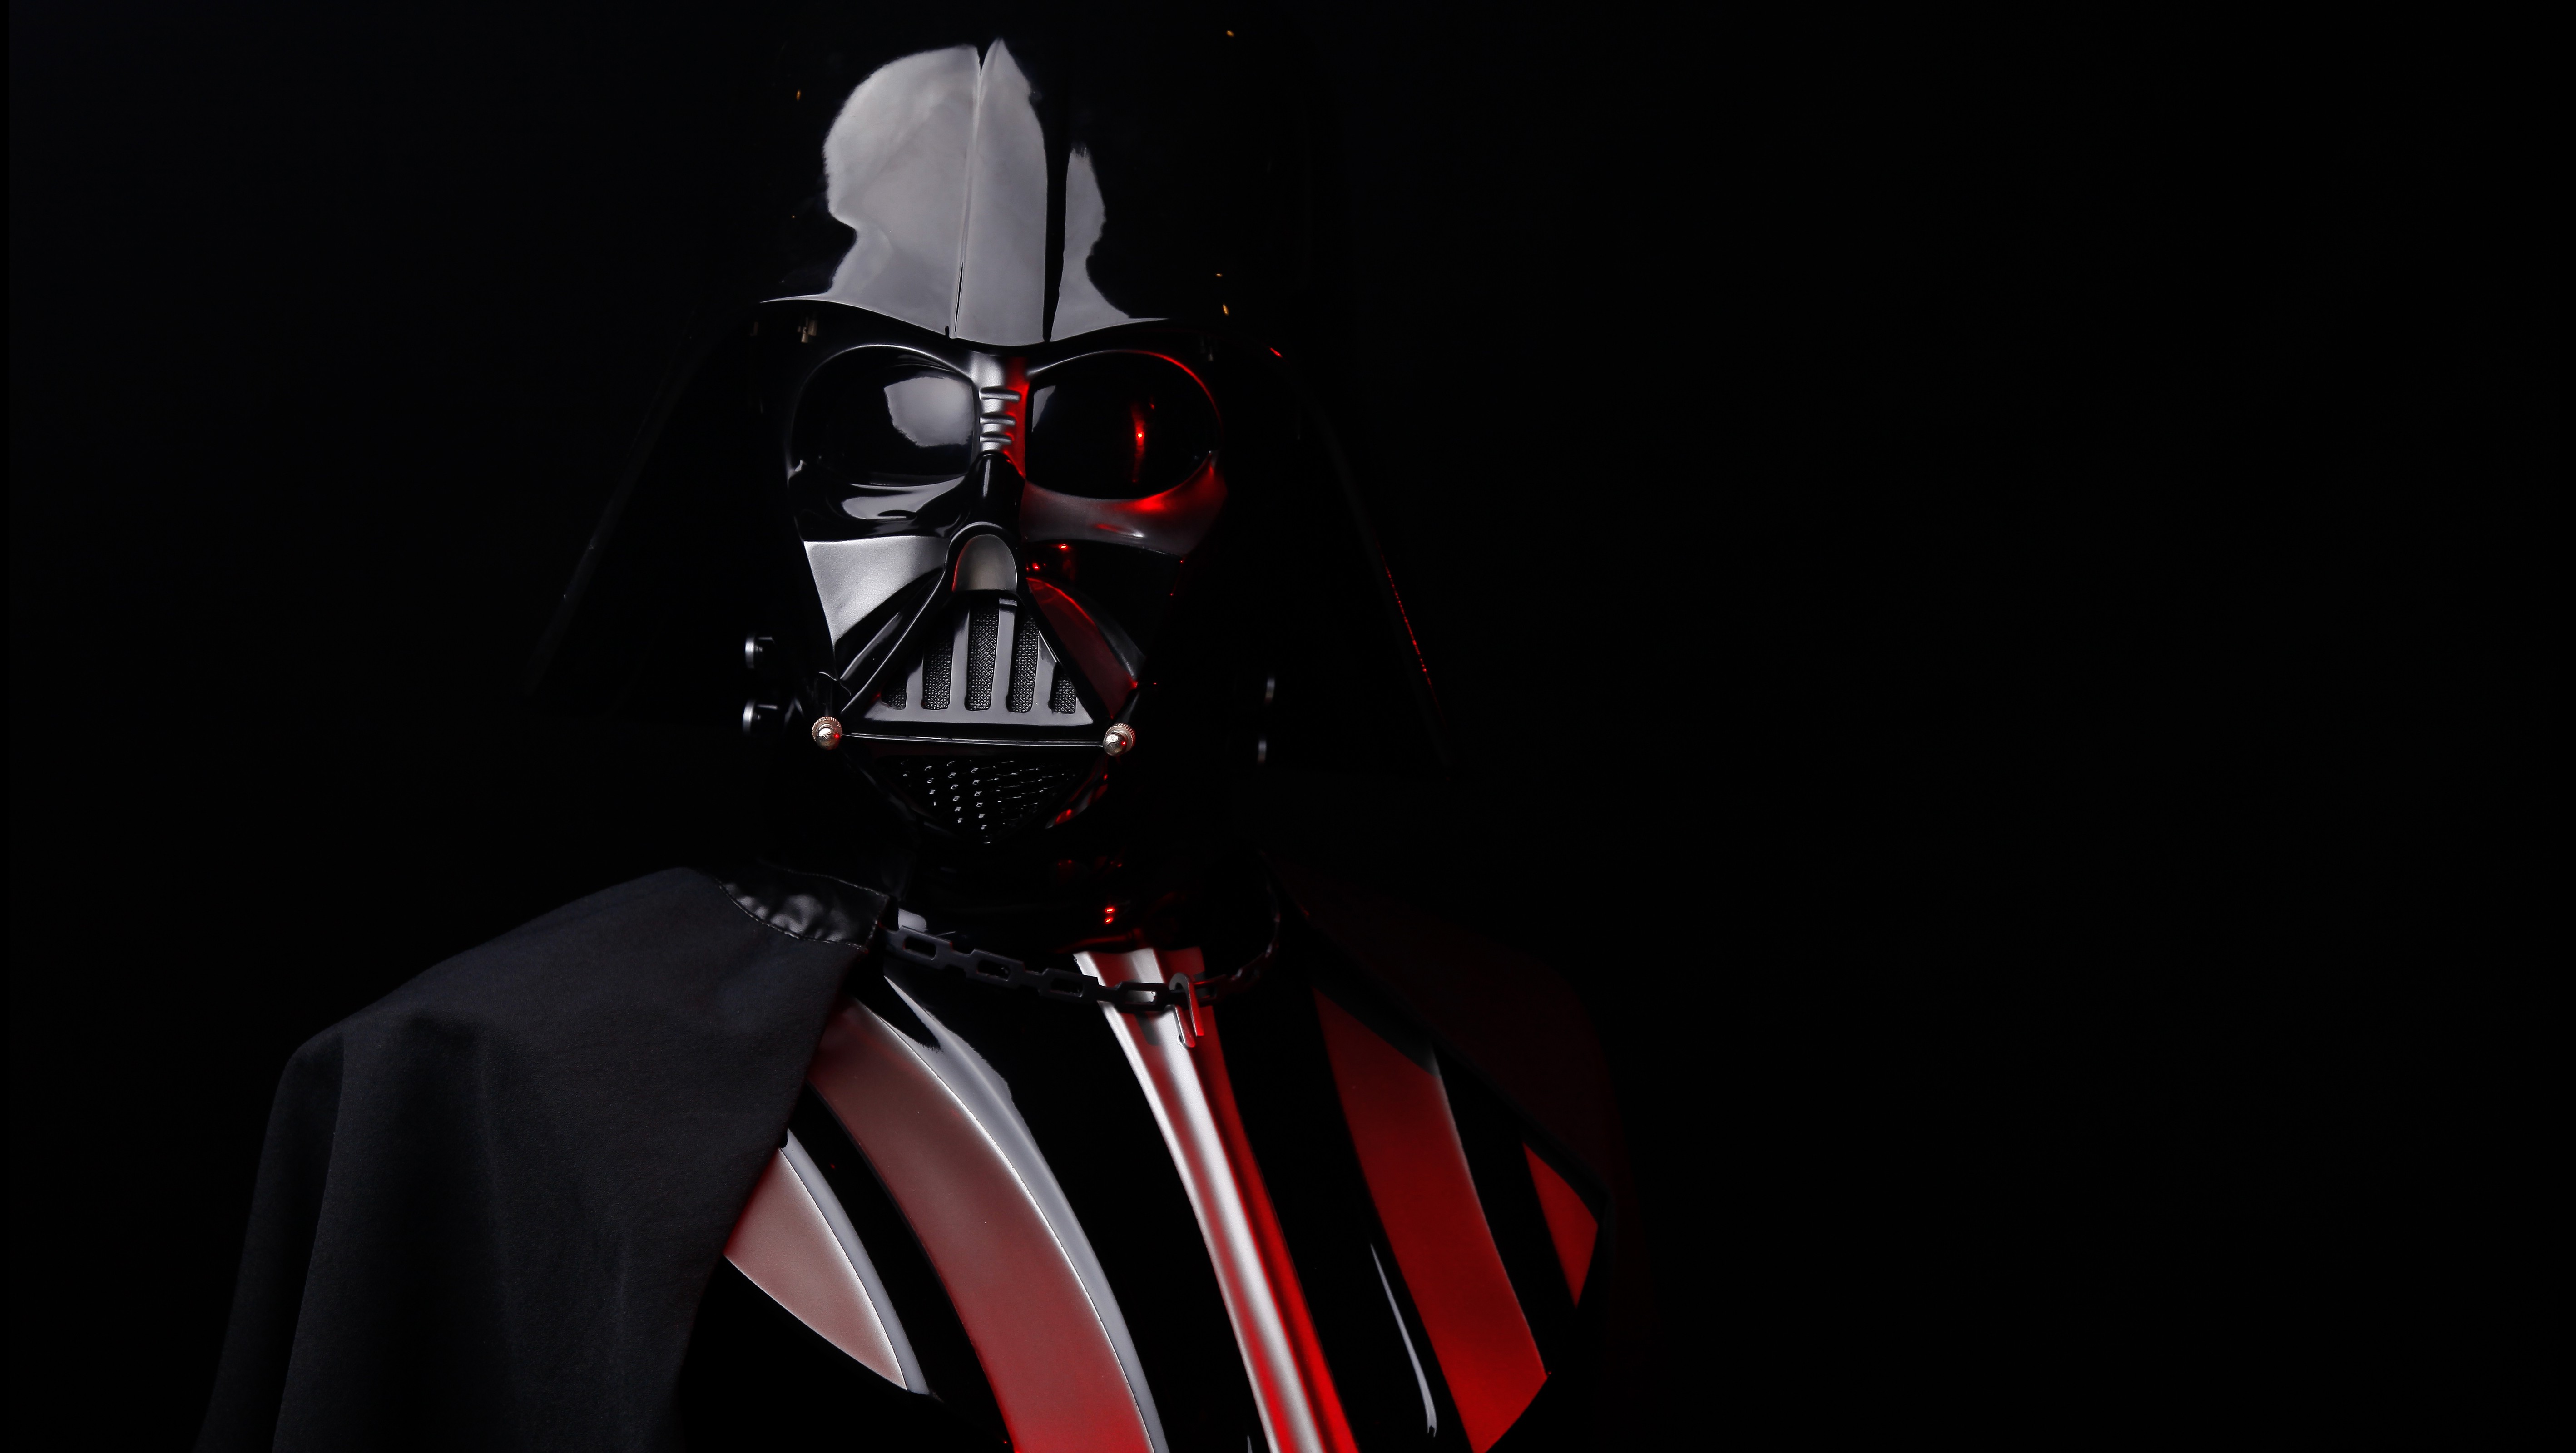 Free Download Star Wars Darth Vader Sith Wallpapers Hd Desktop And 5672x30 For Your Desktop Mobile Tablet Explore 73 Sith Wallpapers Star Wars Wallpaper 1080p Star Wars Sith Wallpaper